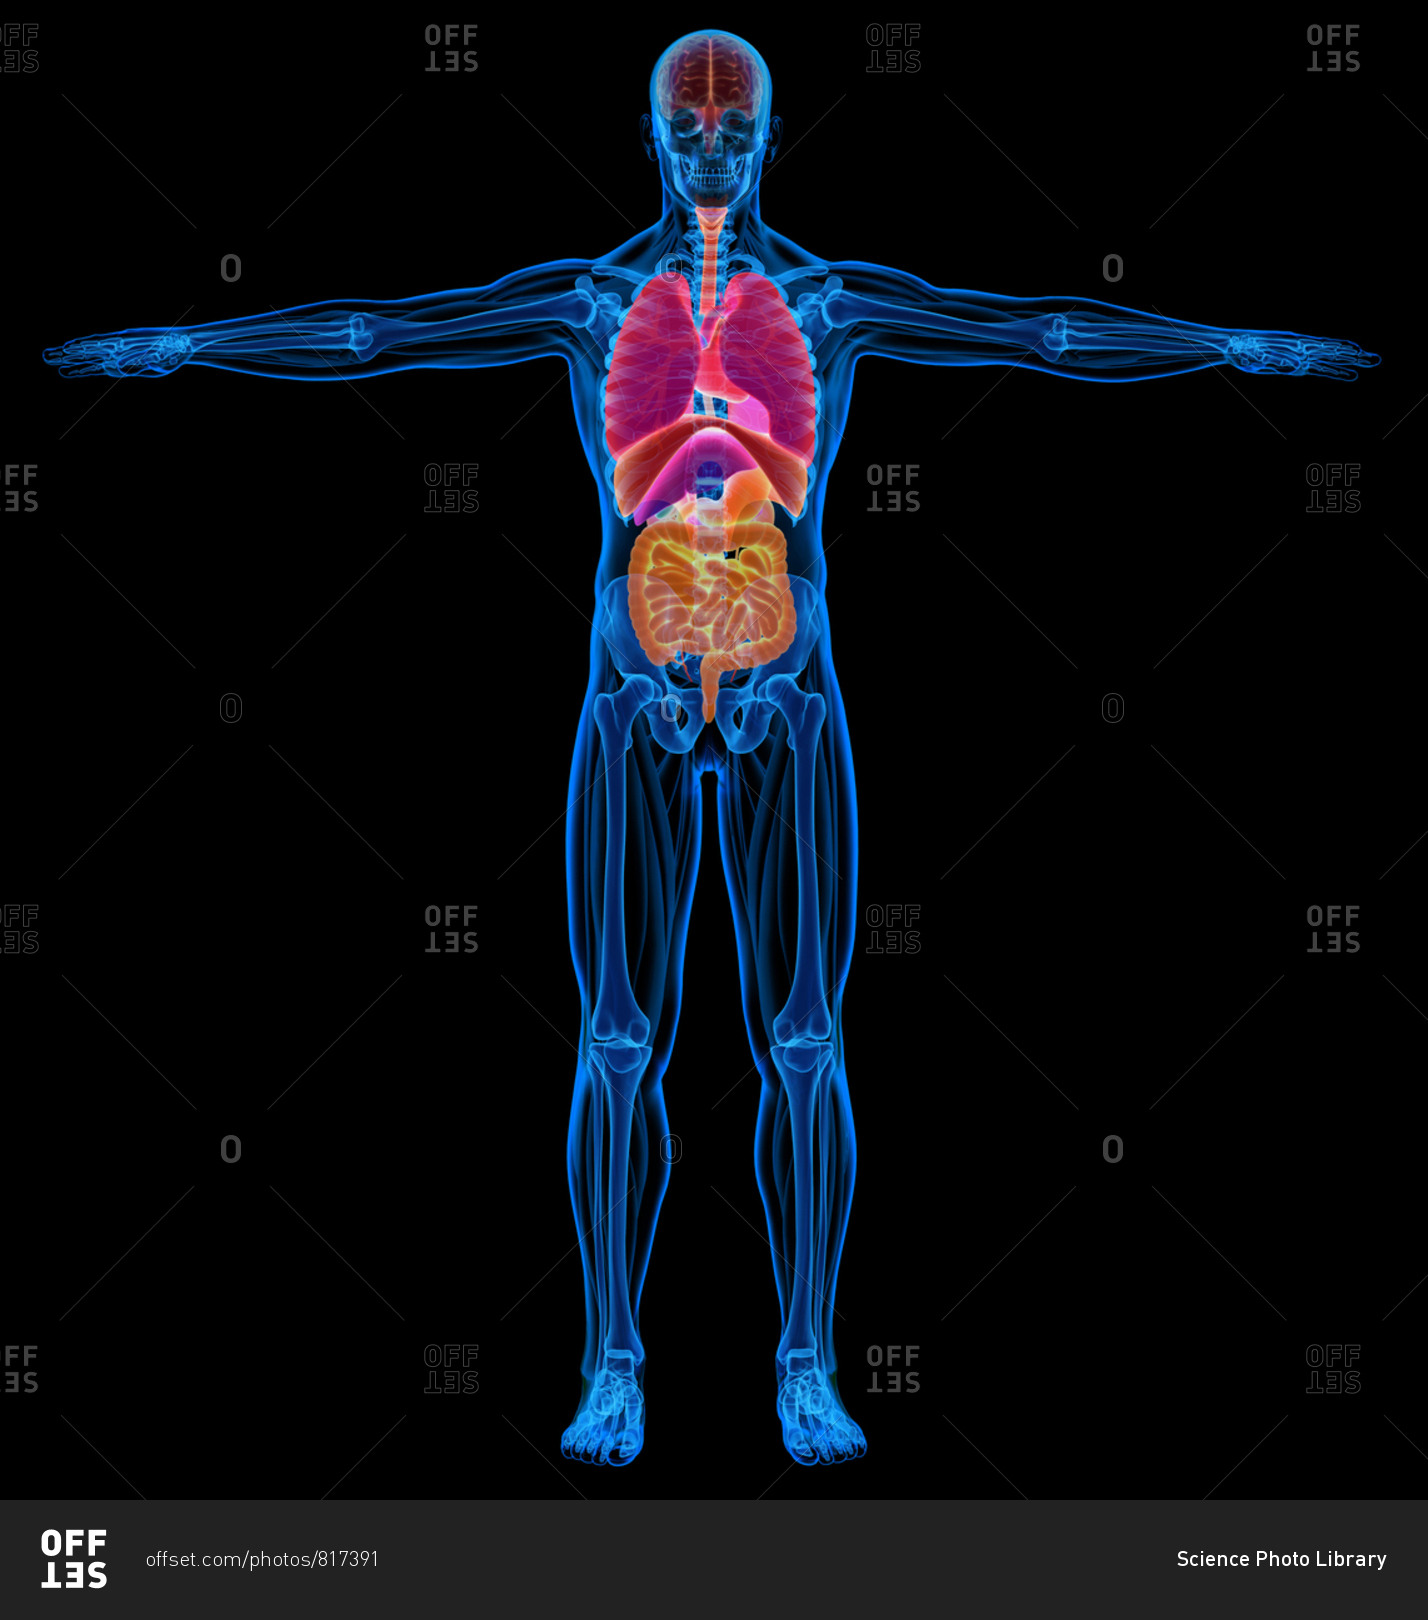 Male skeletal, muscles and internal organs diagram. X-ray. On black background. stock photo - OFFSET